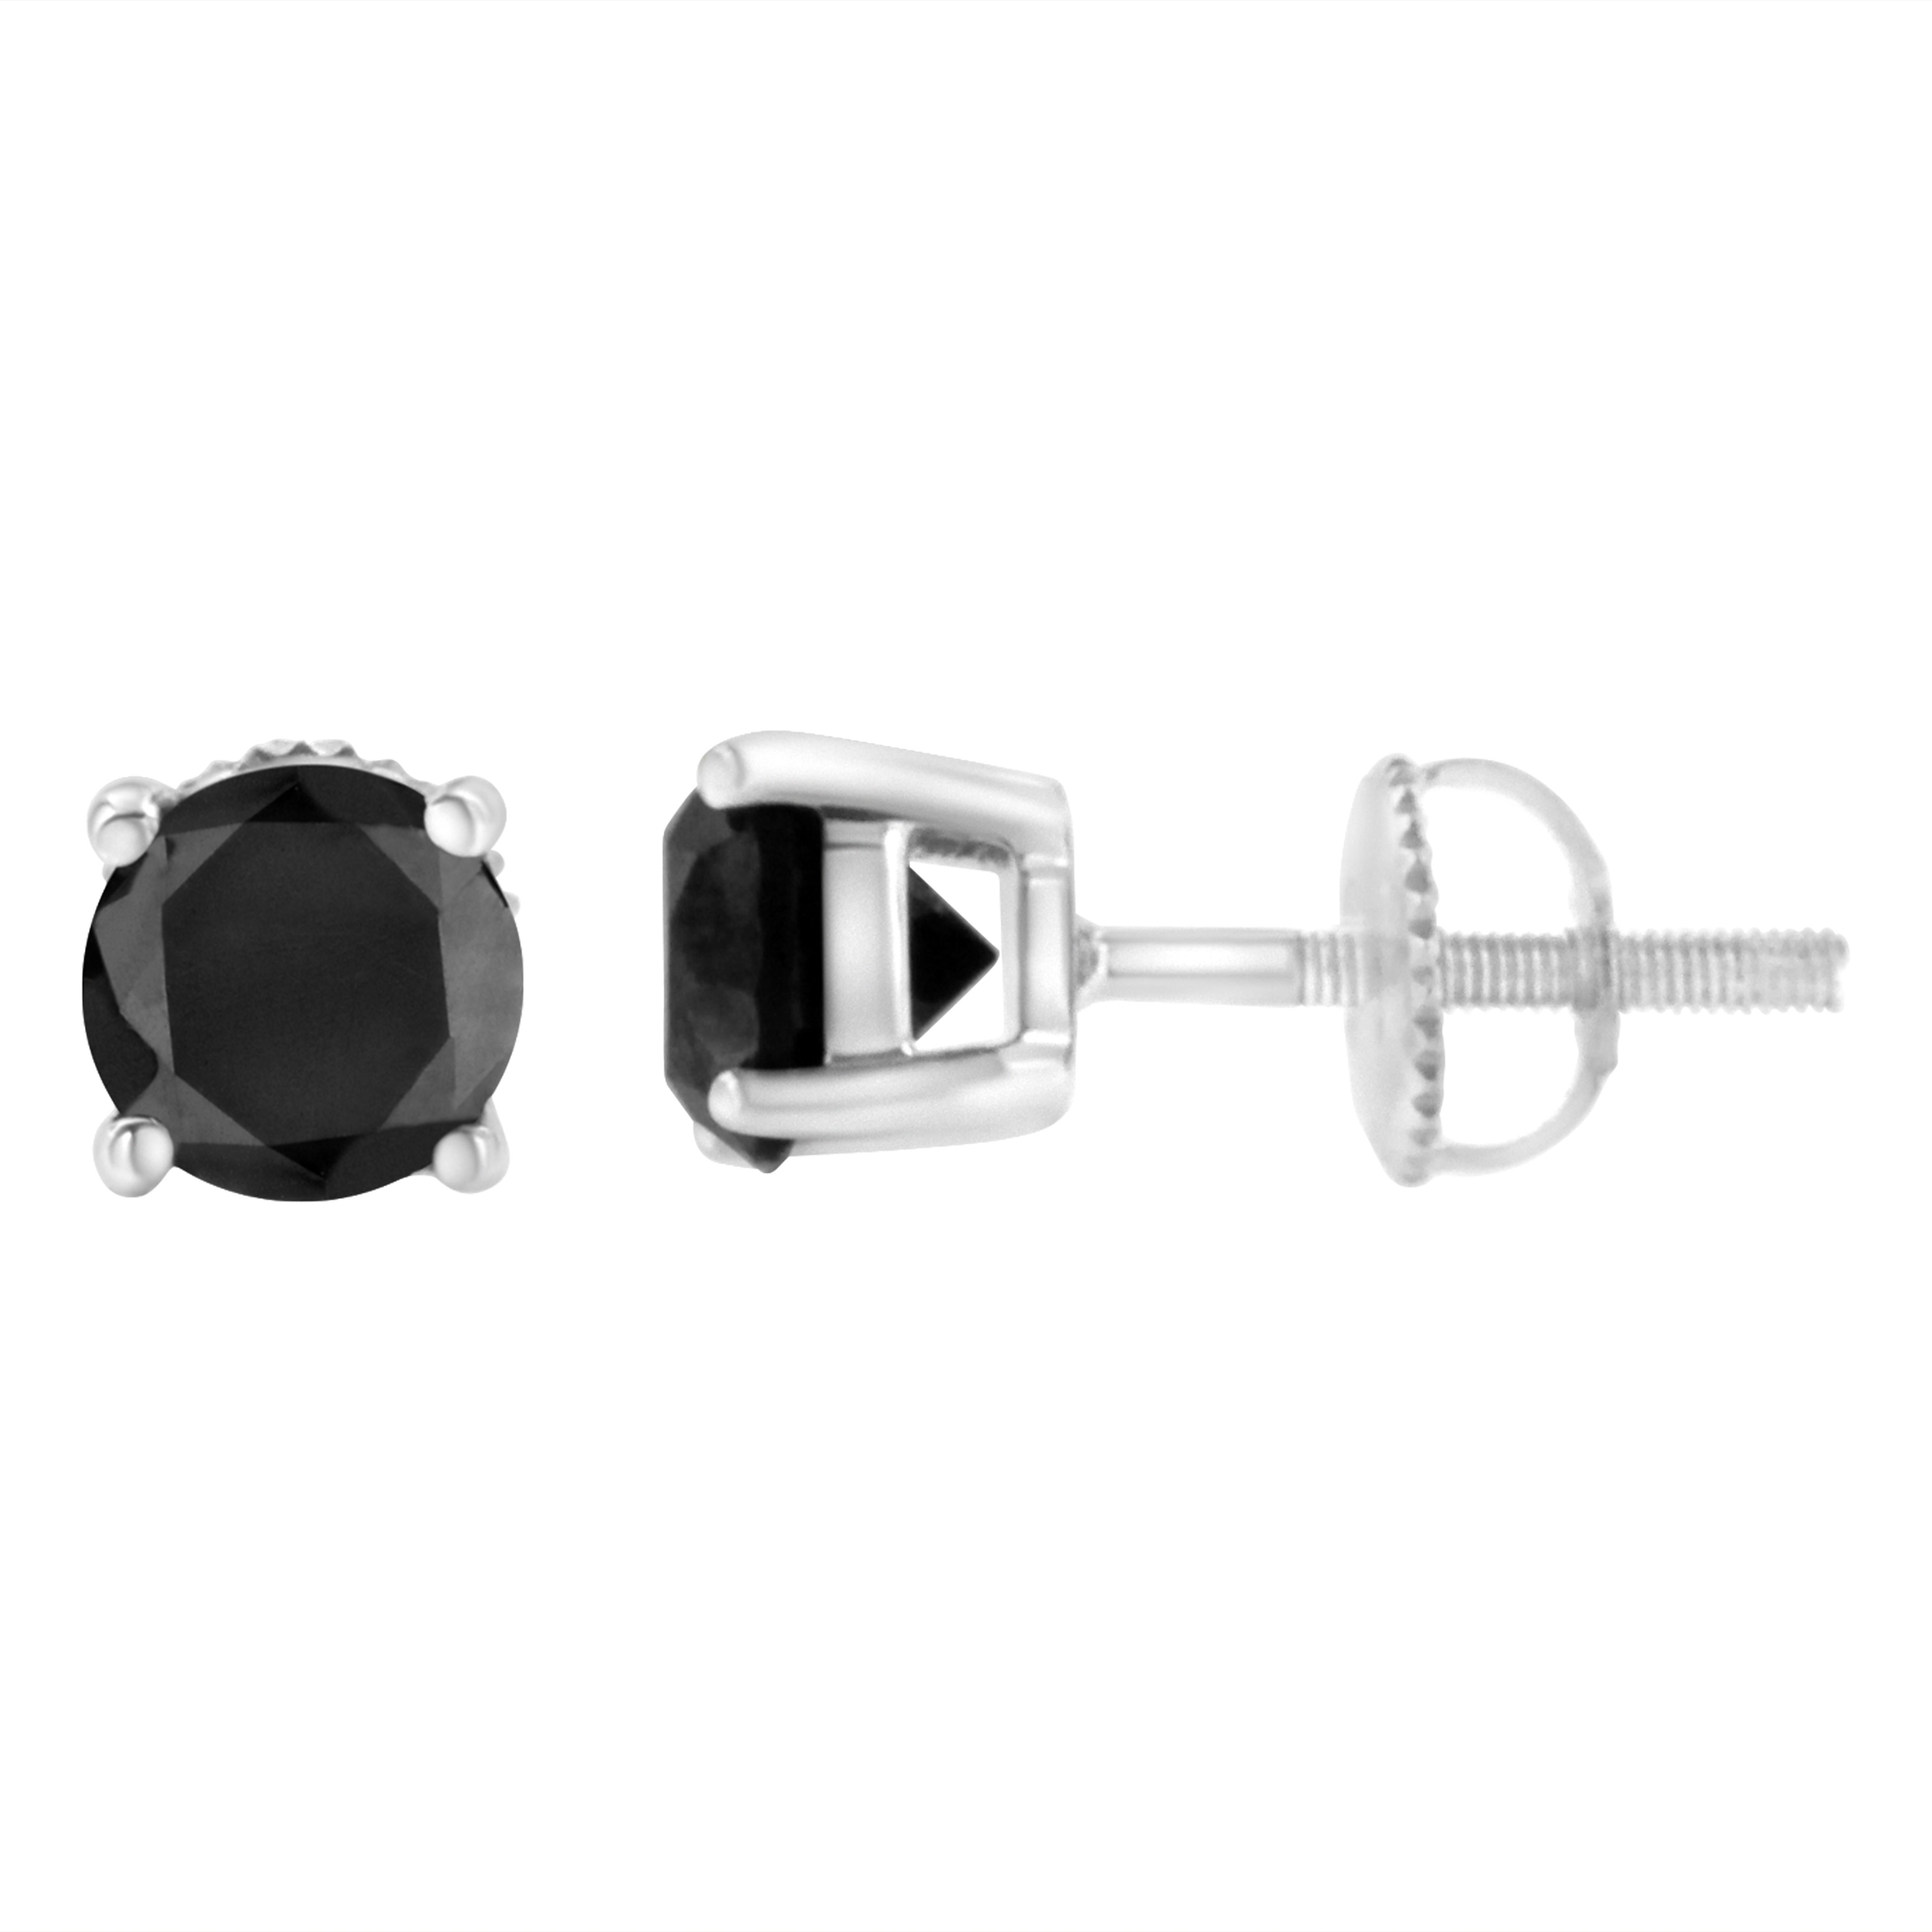 Add this stunningly unique diamond stud earrings to your jewelry collection and impress all your girlfriends. This beautiful pair of treated black studs are made from the finest .925 sterling silver, and is embellished with treated, black round-cut